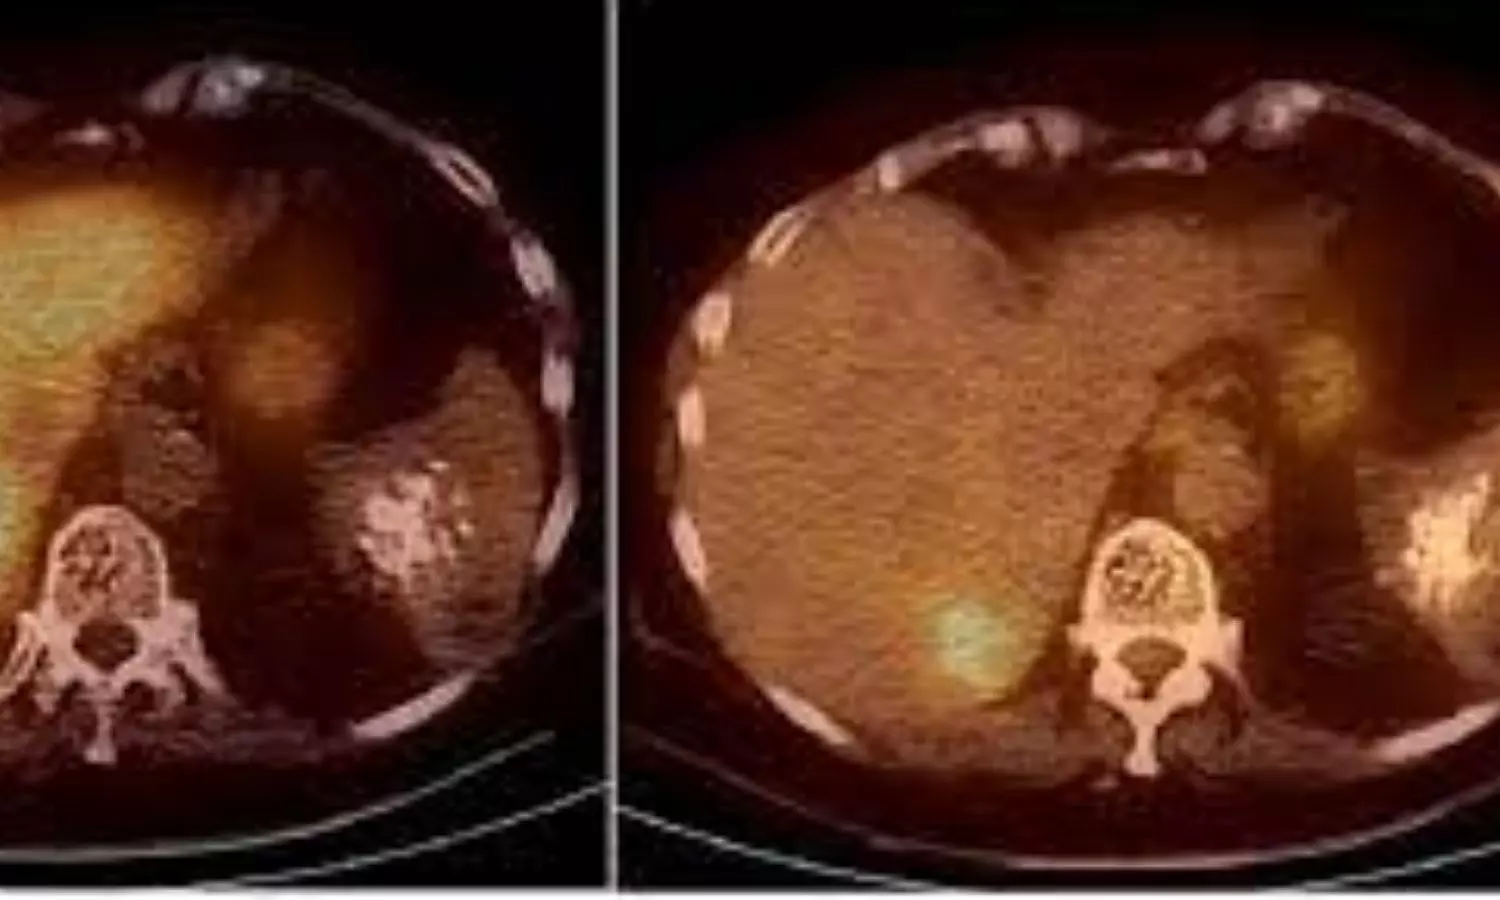 PET/CT predicts early response to TARE treatment in liver cancer patients: Study